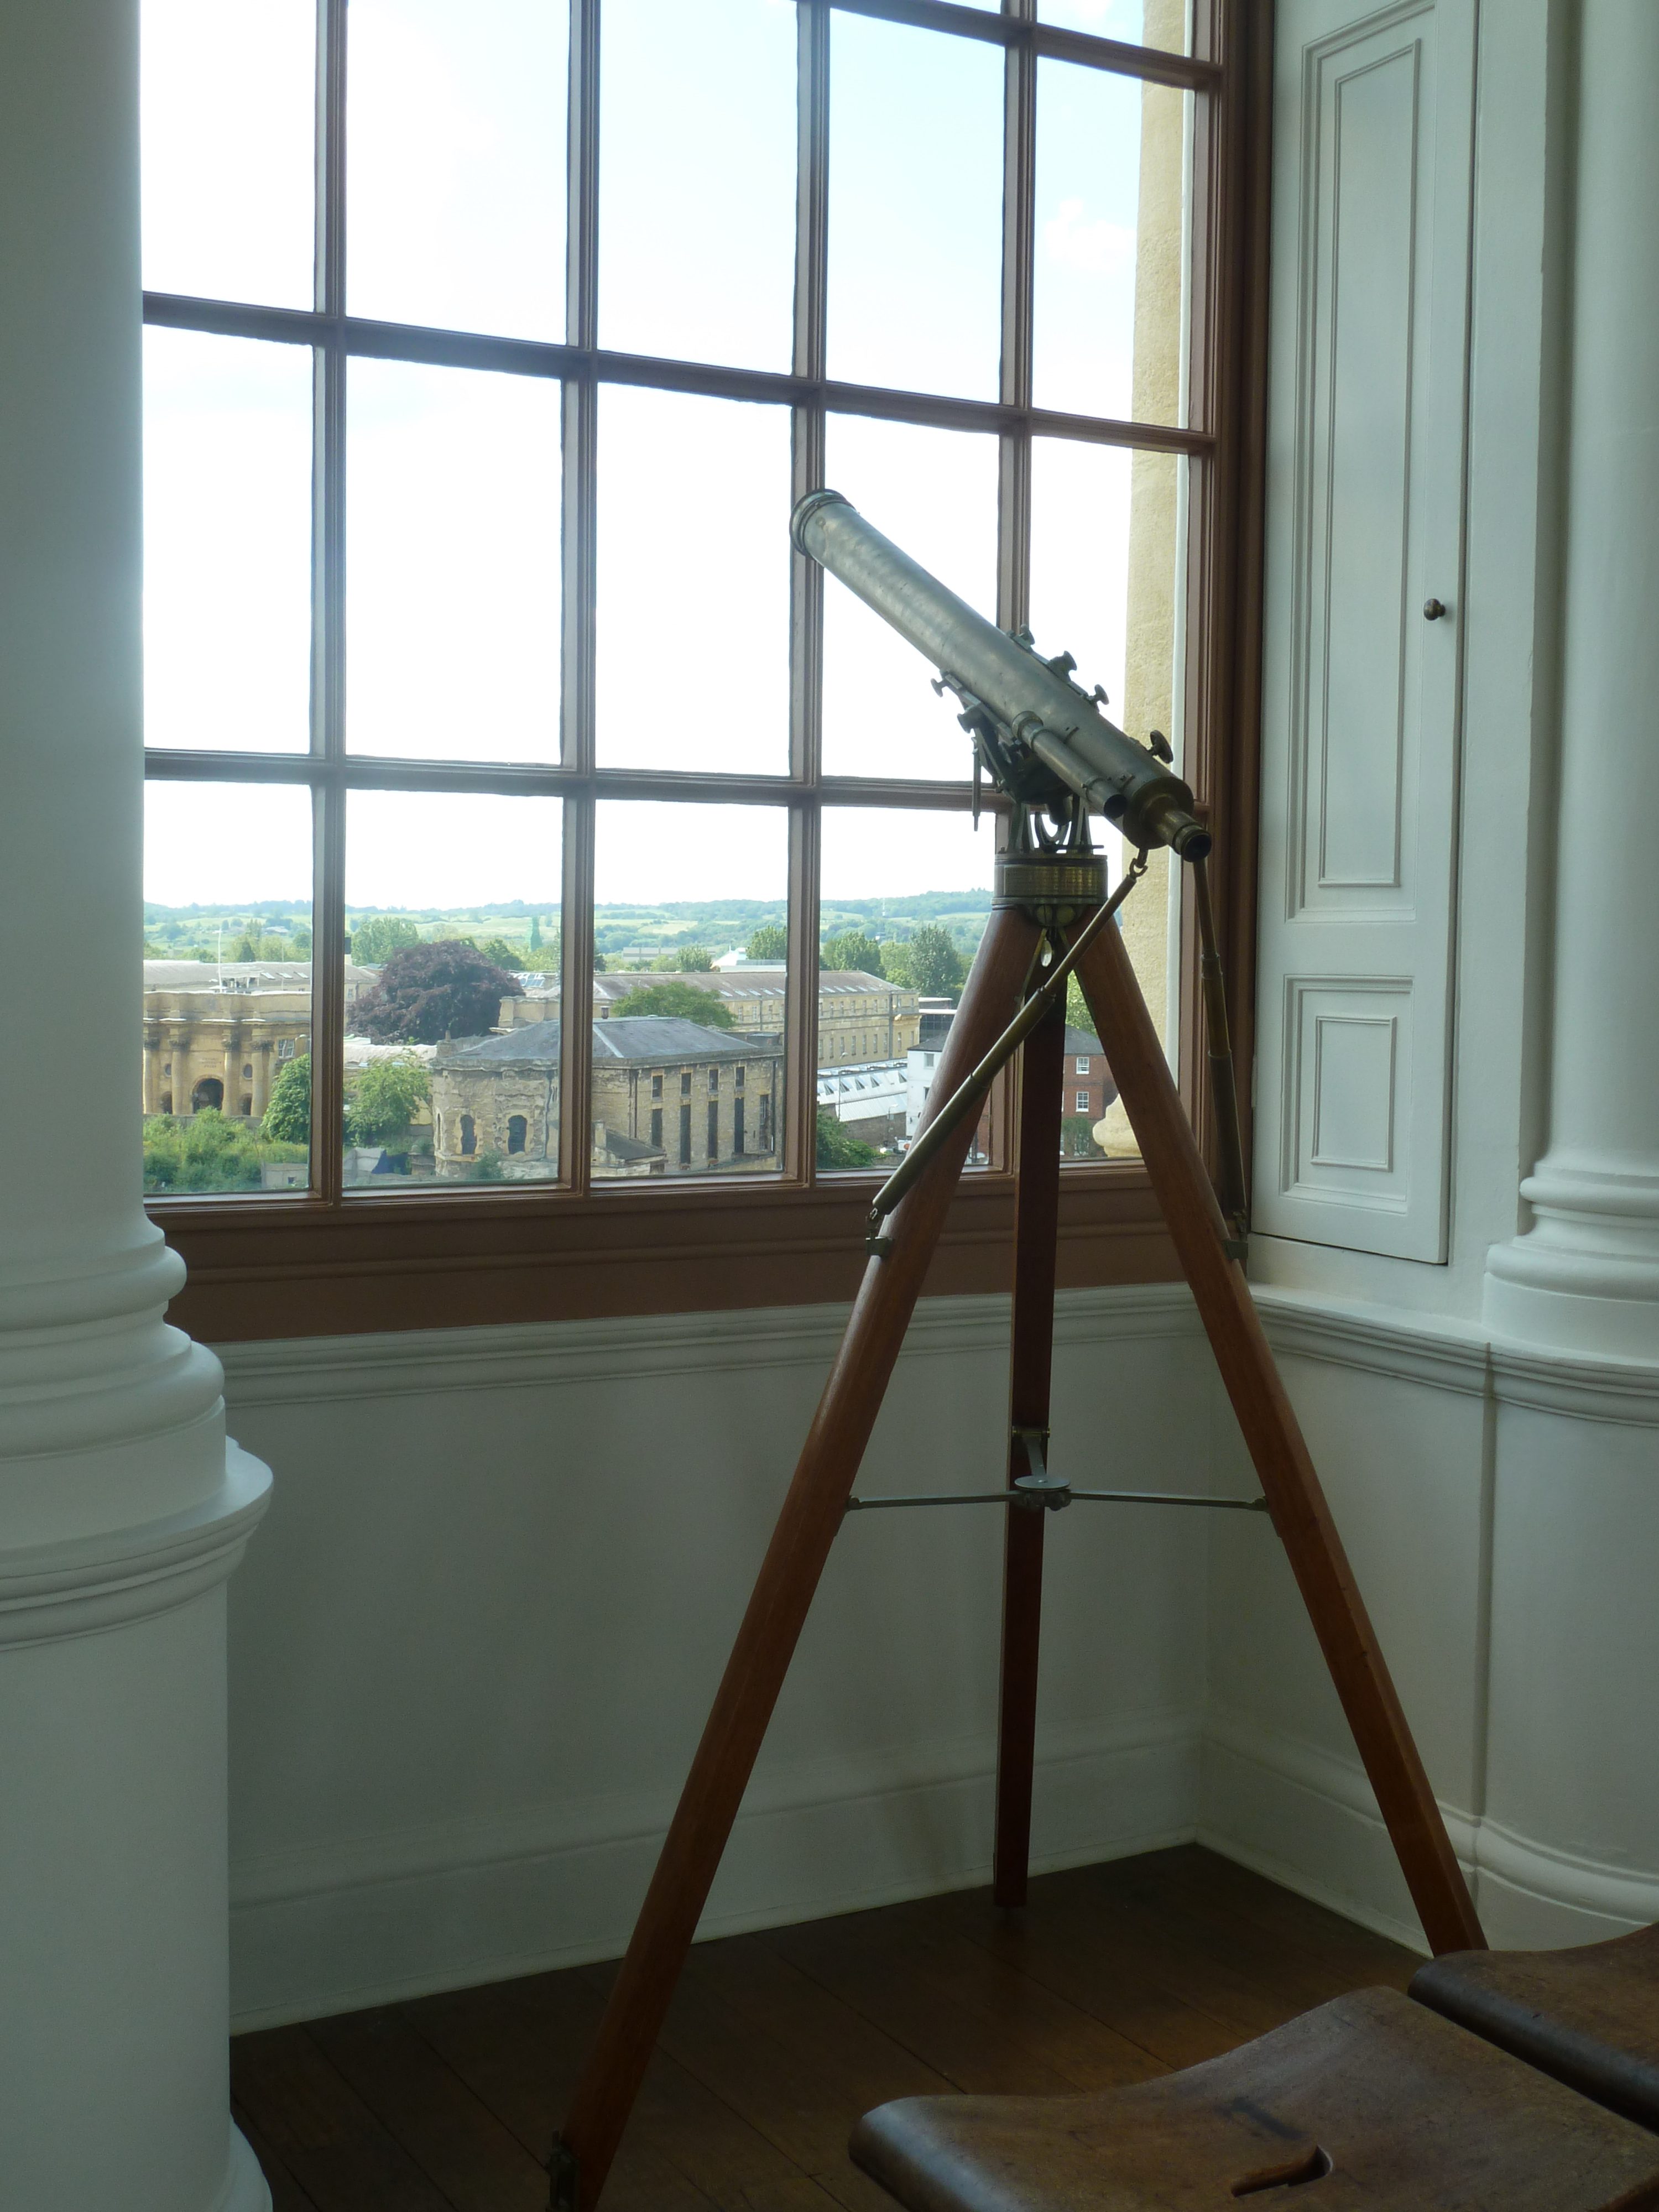 The Duke of Marlborough Telescope positioned against a window in the Tower of the Winds overlooking Jericho 